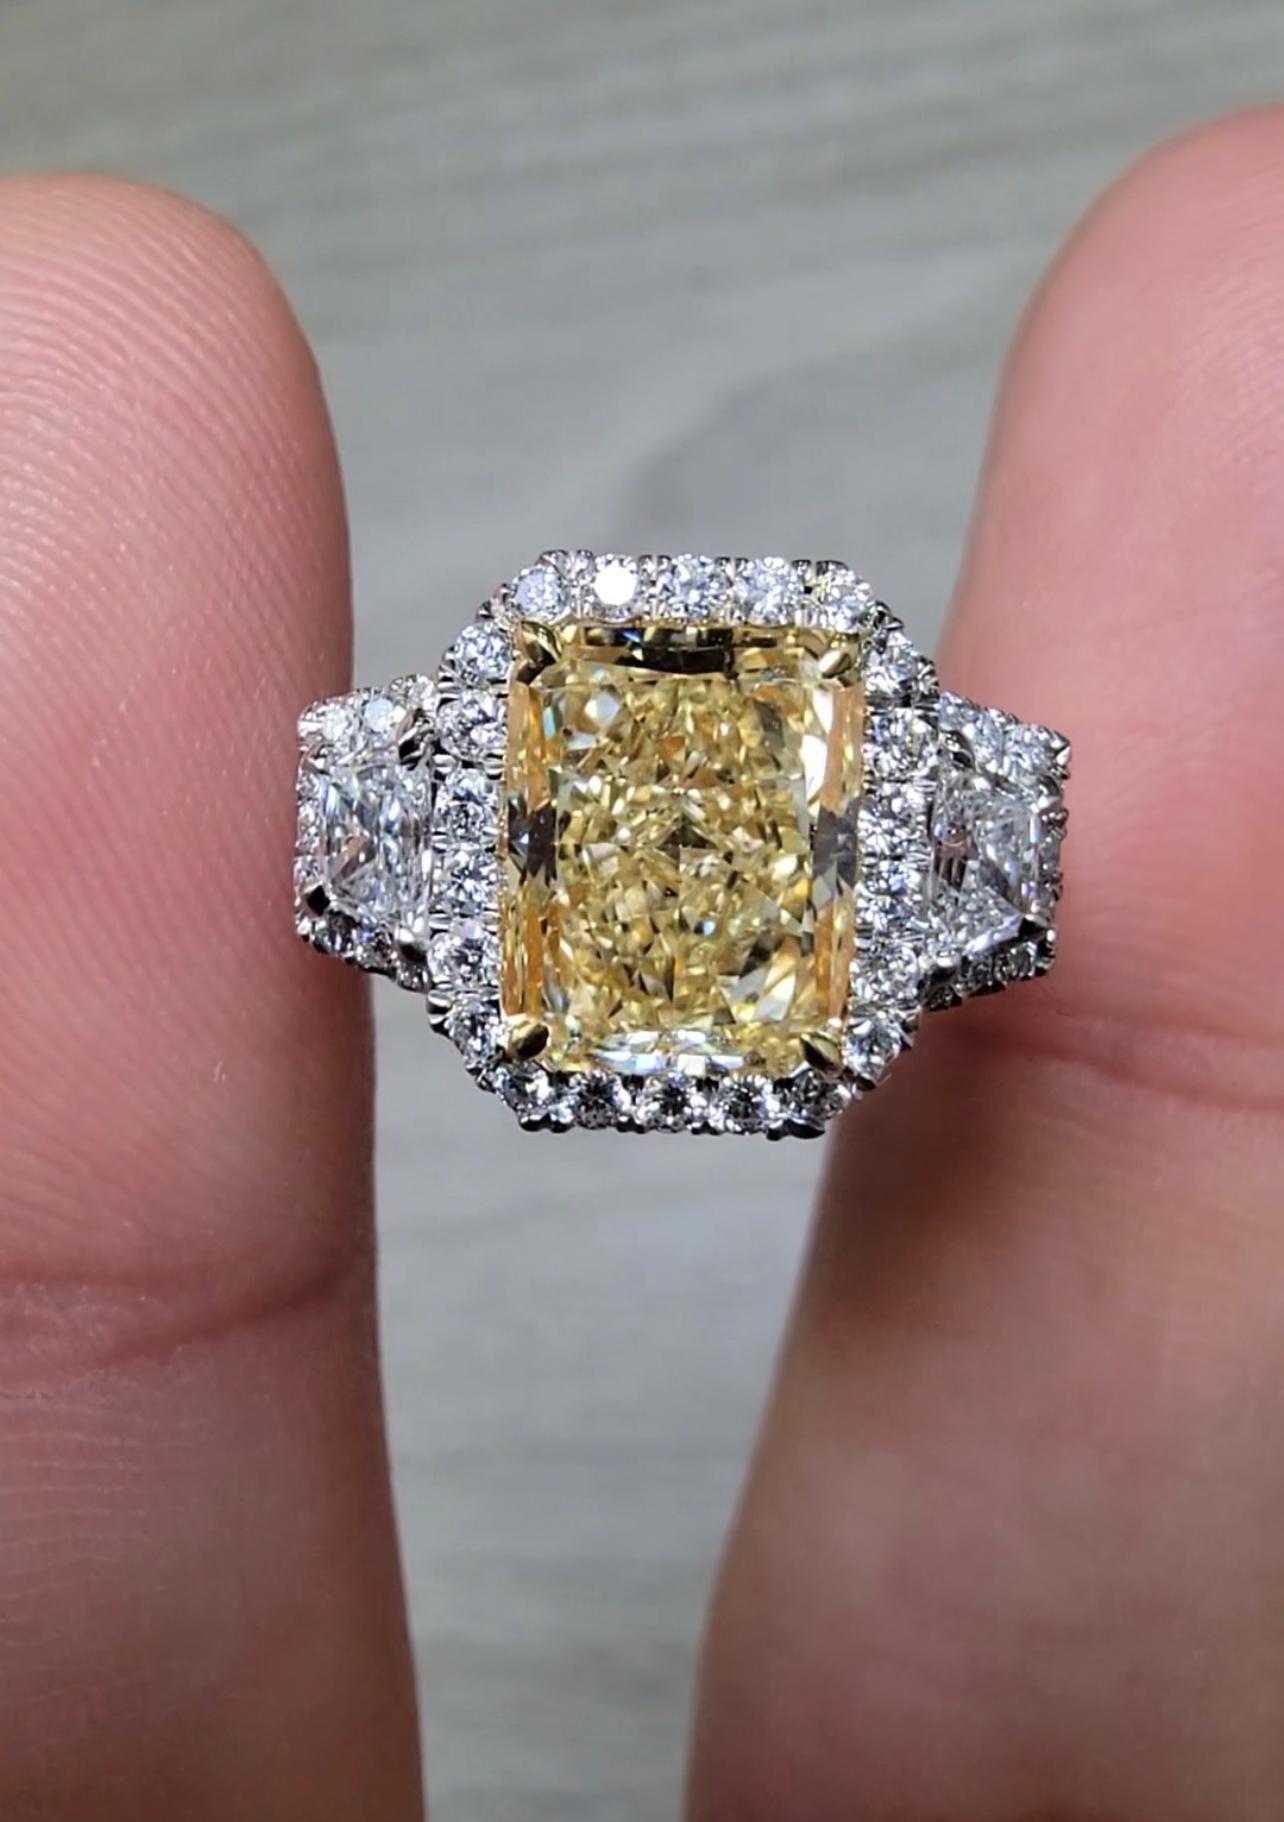 GIA U-V color rectangular radiant
Great spread and life!
Set in a Platinum and 18kt Yellow Gold Halo/Three Stone Ring with 0.37ct F VS Trapezoids and 0.87ct of round white diamonds